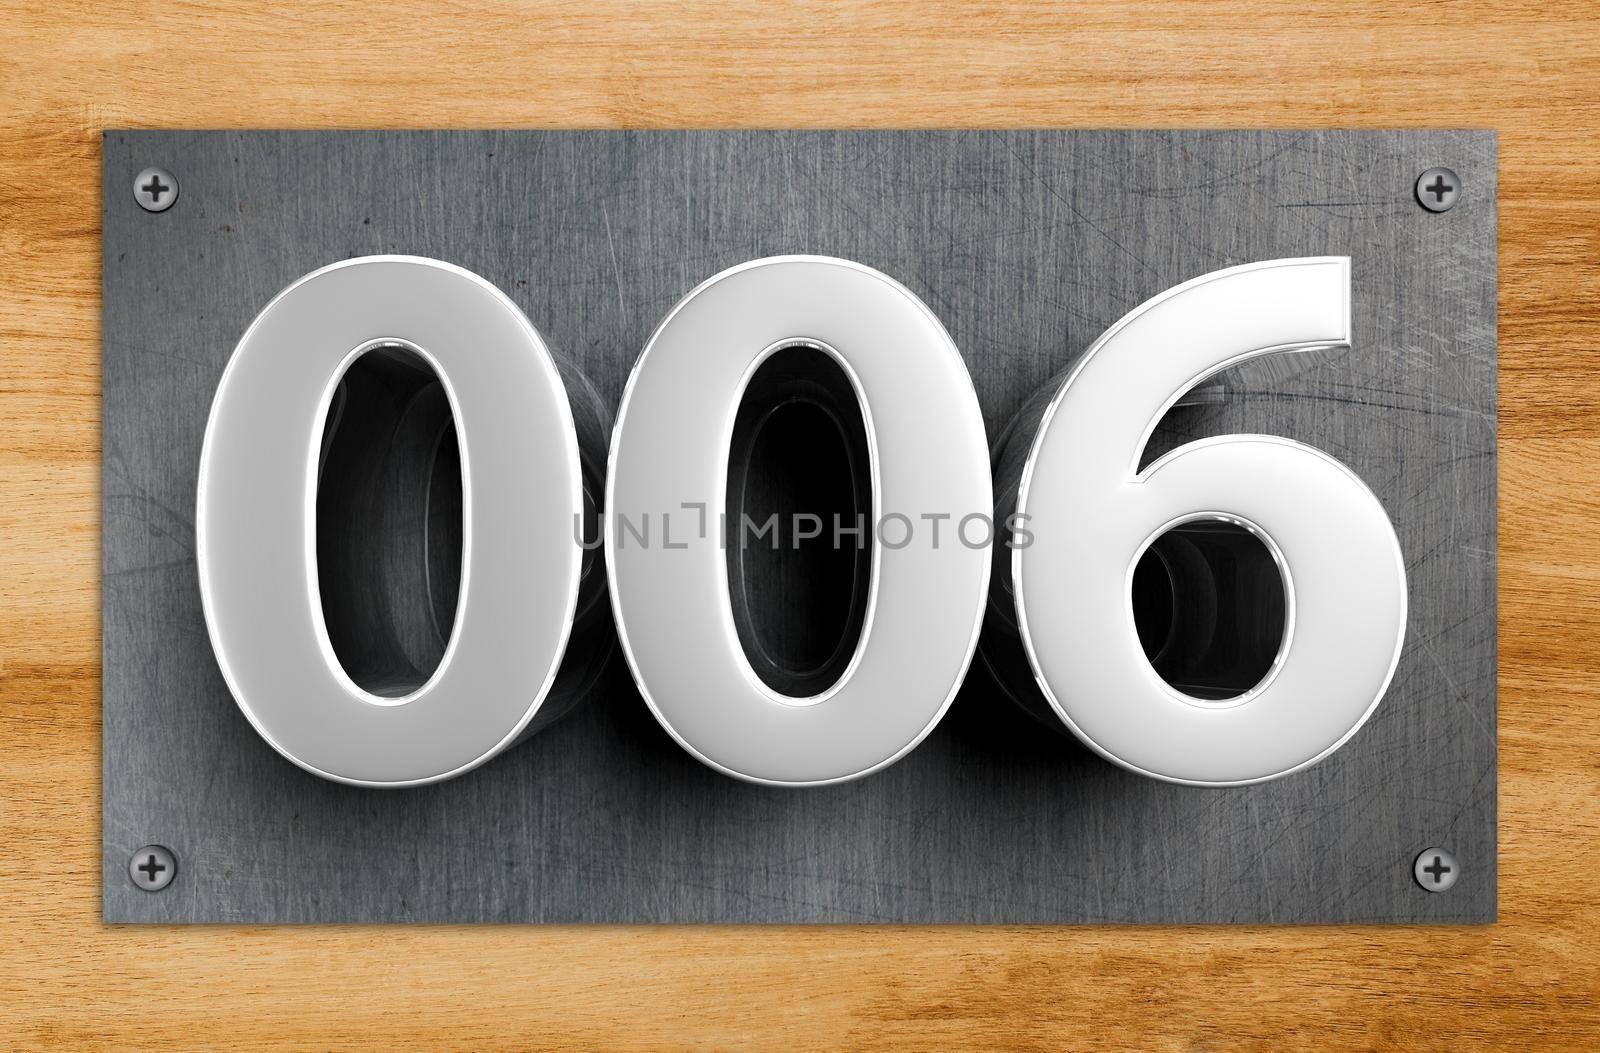 Rendering 3D illustration Stainless Steel Signs number 006 hanging against the room door.(With Clipping Path).